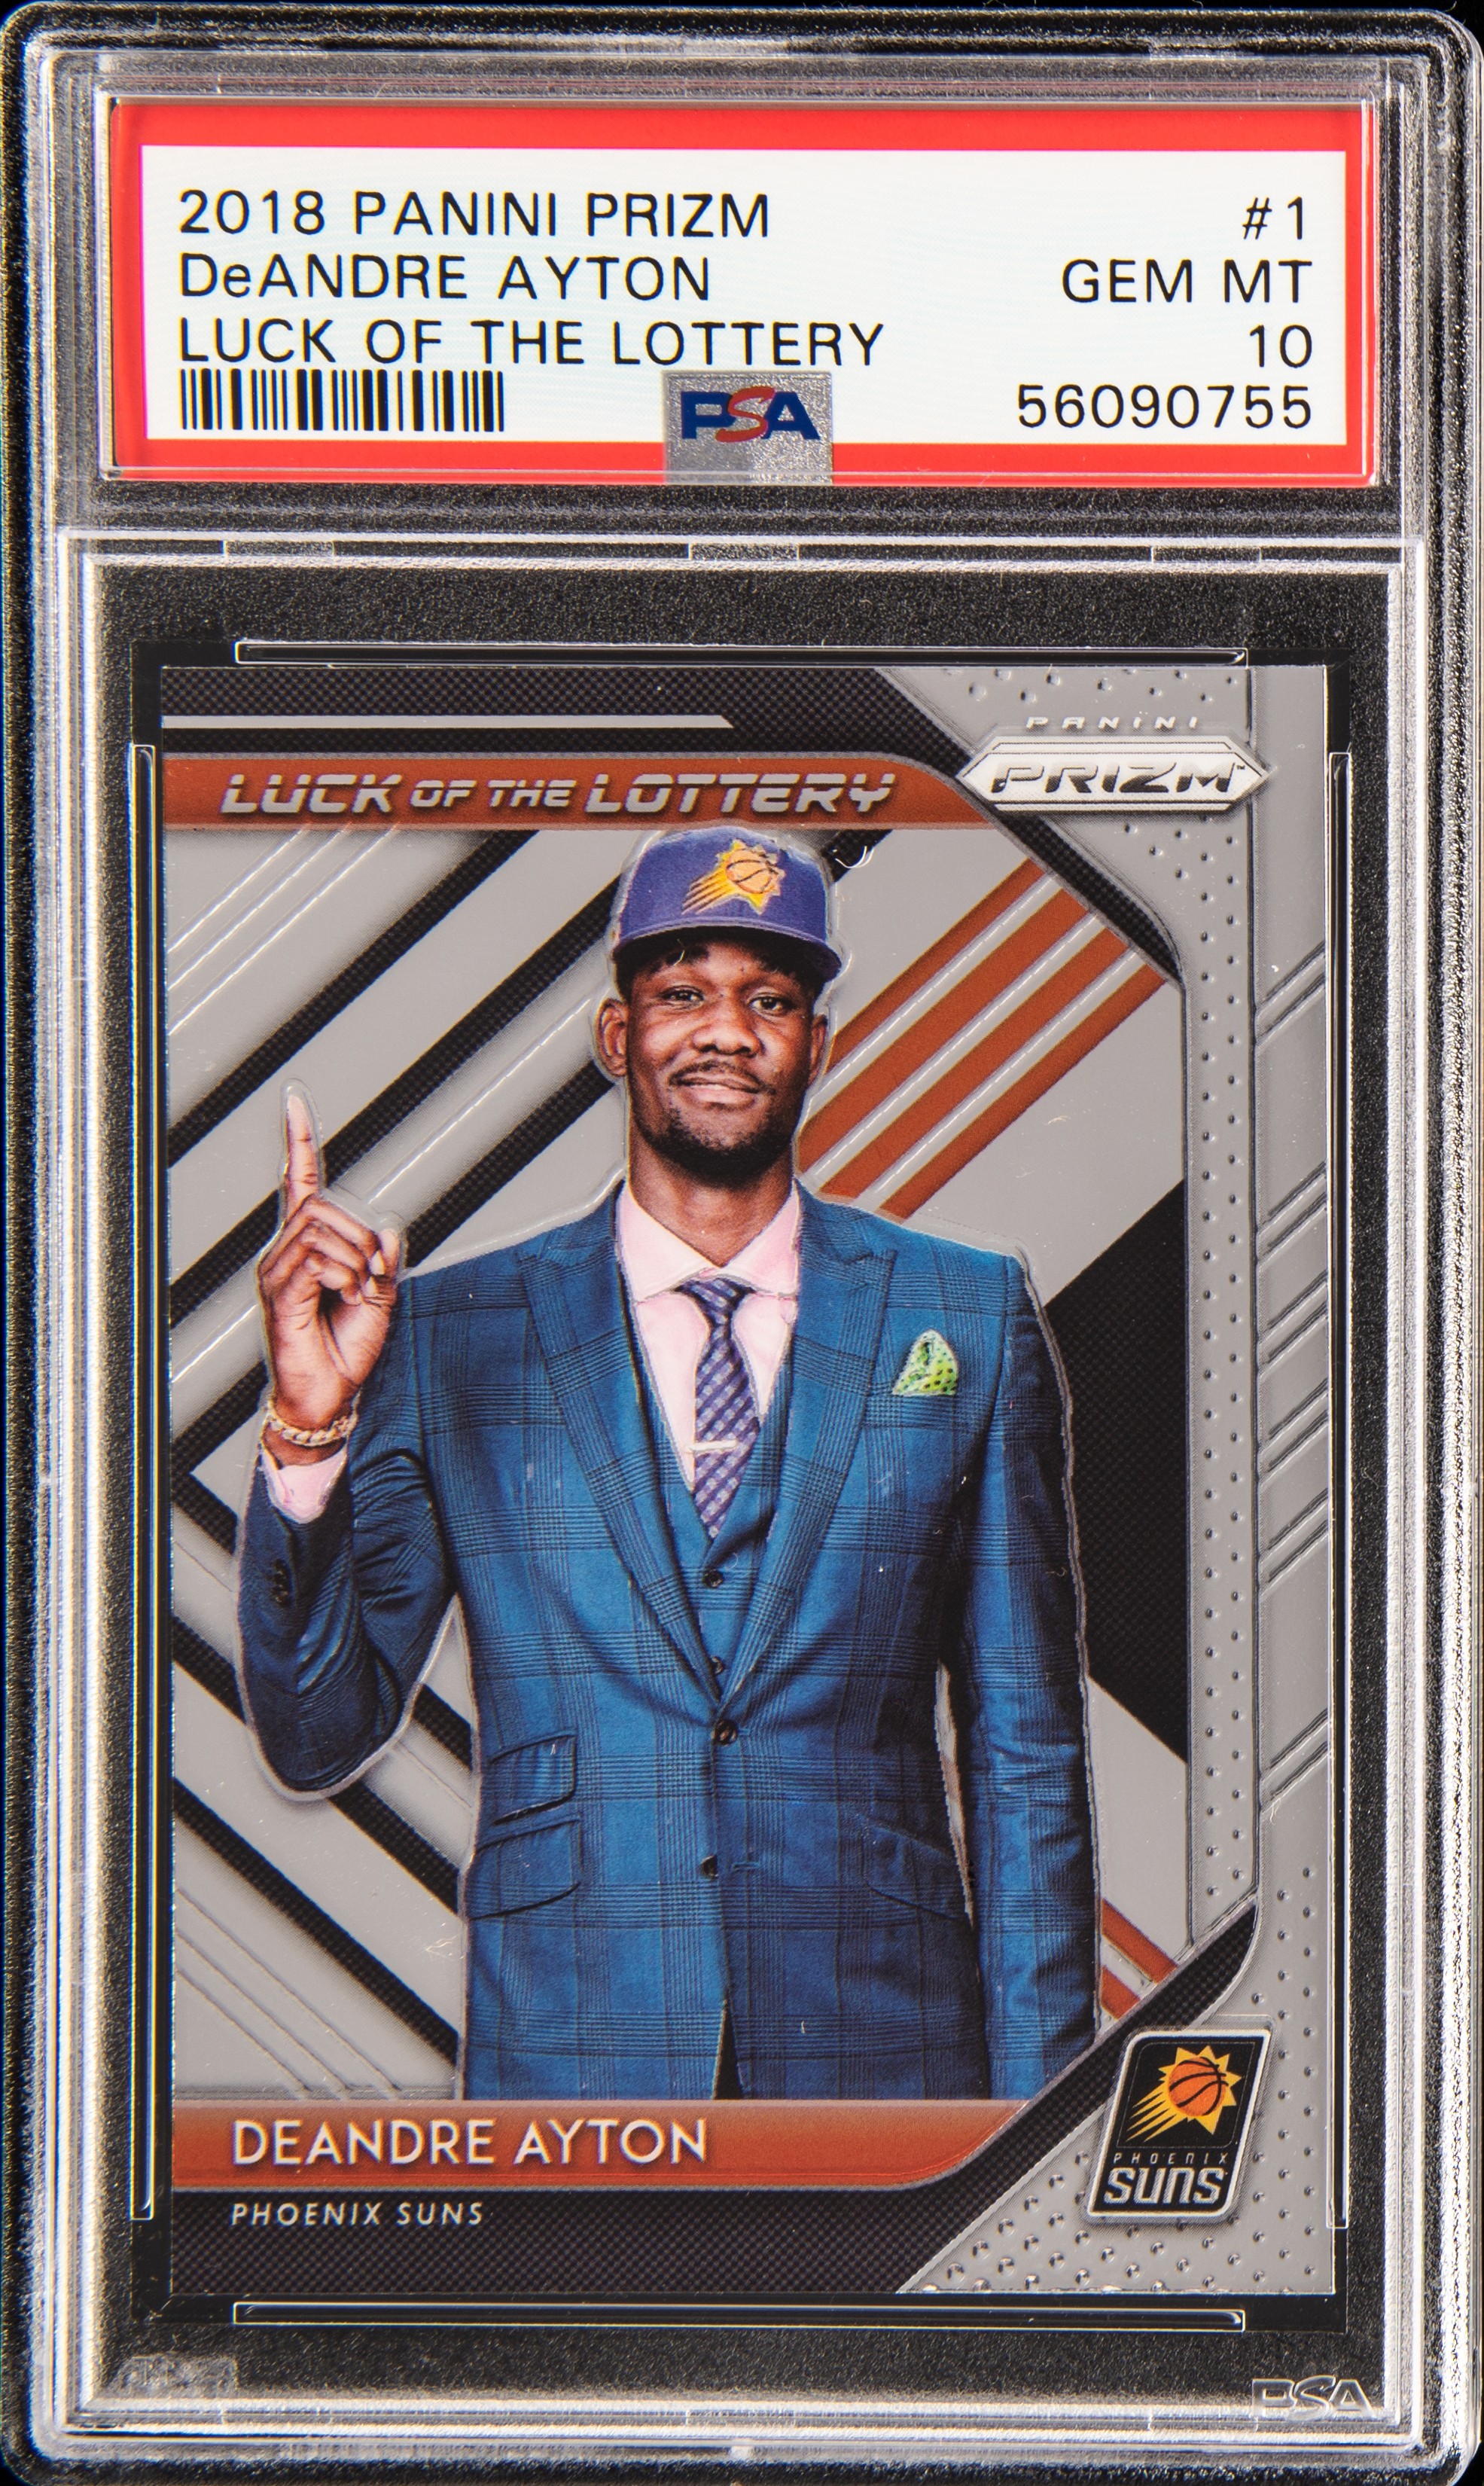 2018 Panini Prizm Luck Of The Lottery 1 Deandre Ayton Rookie Card – PSA GEM MT 10